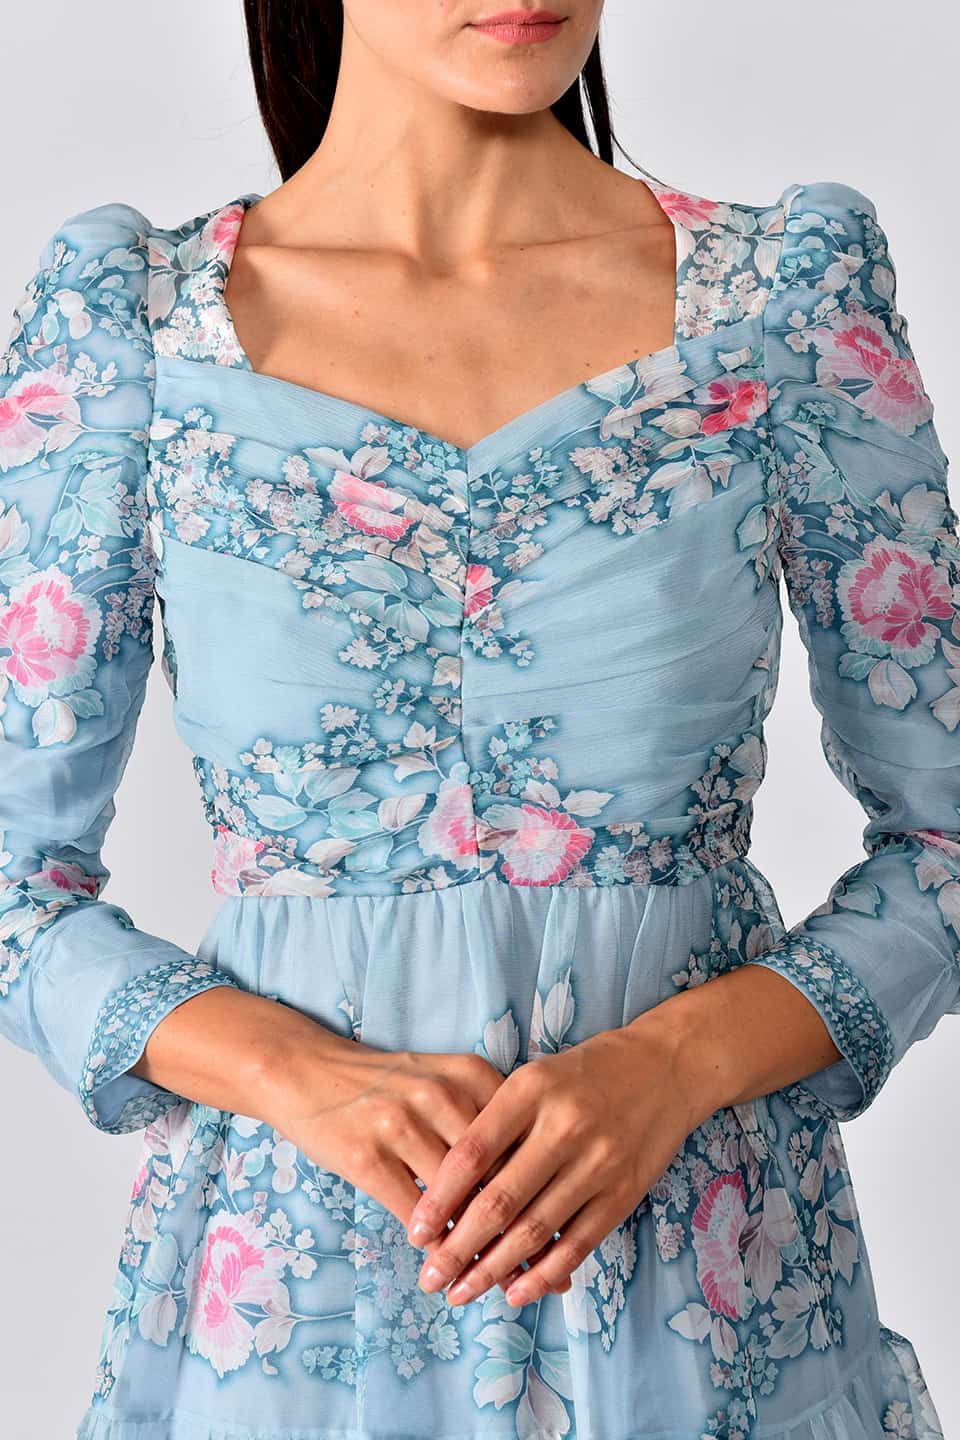 Thumbnail for Product gallery 5, Model wearing floral print silk chiffon tiered long dress in a pale blue color from stylist Vilshenho, texture details